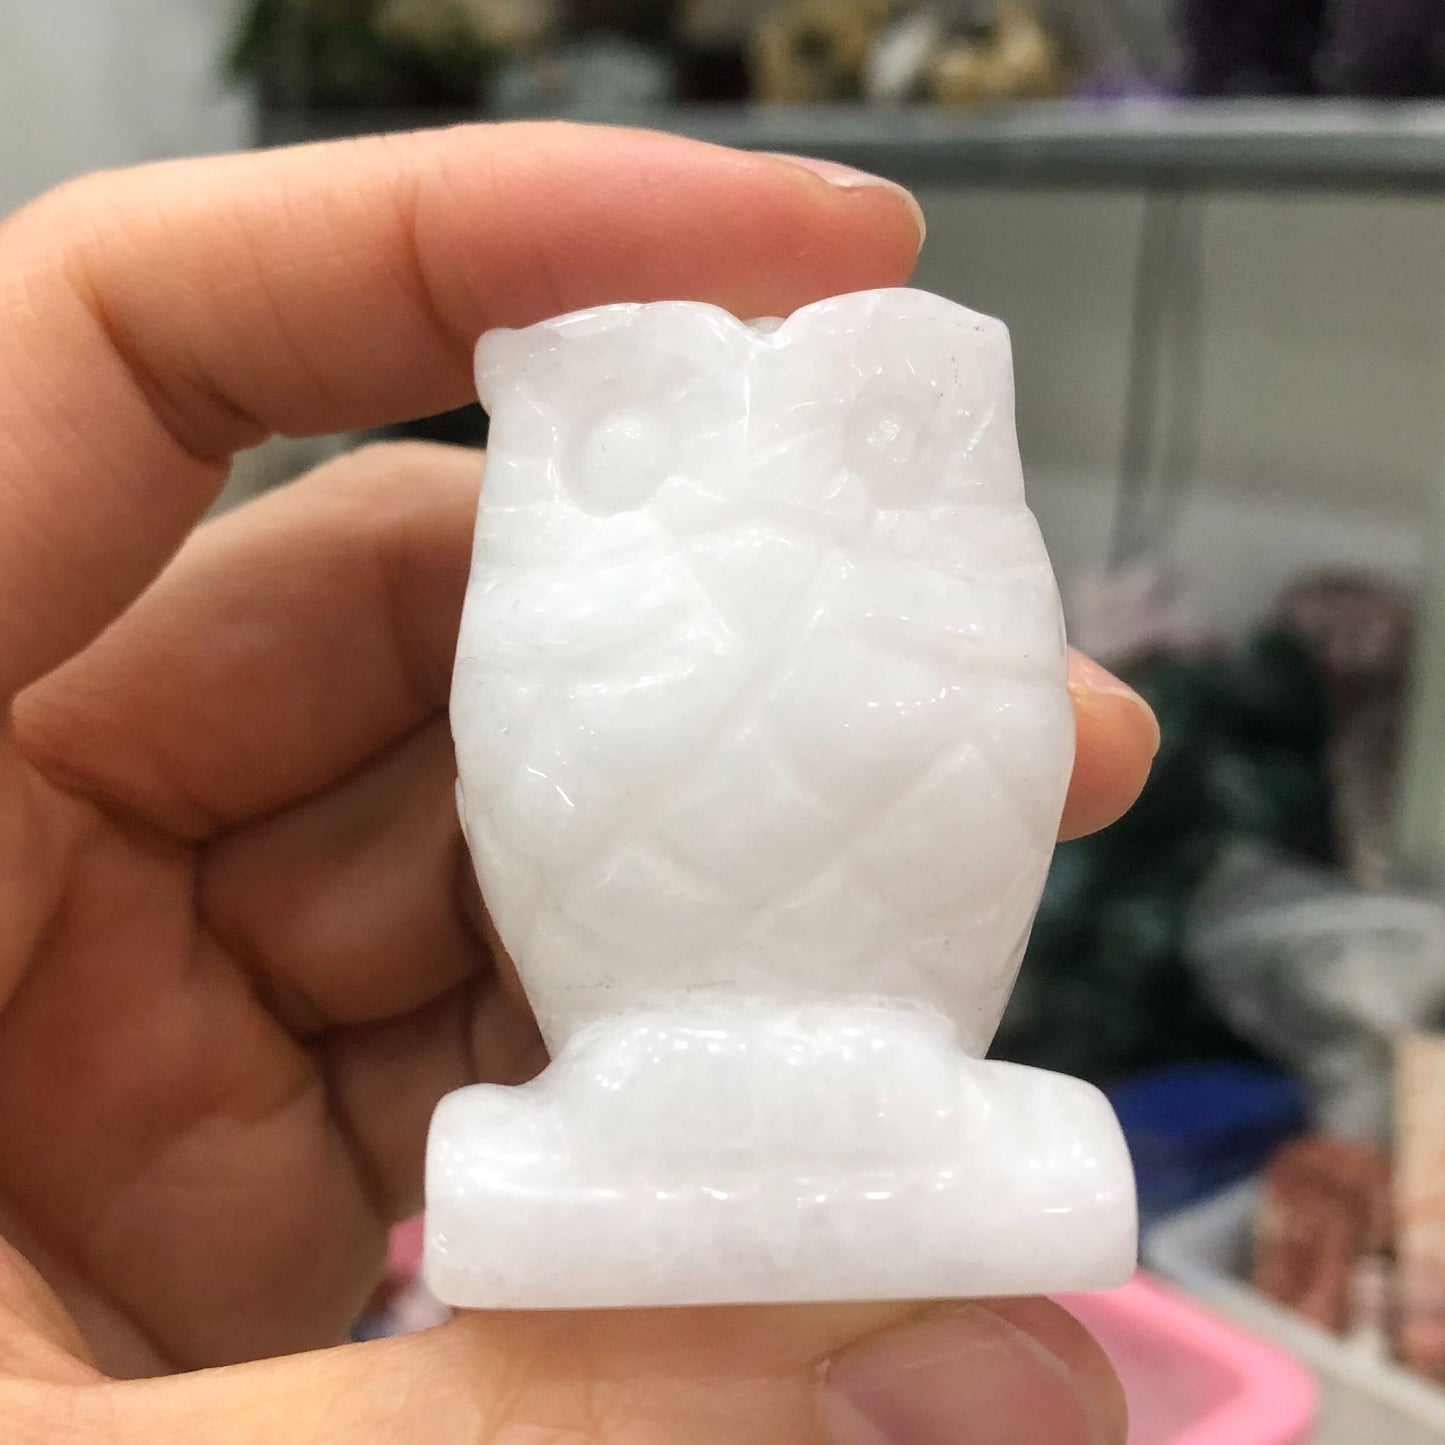 Handmade White Jade Crystal Owl Figurine - 100% Natural Stone Carving for Home Decor and Collectible Gift